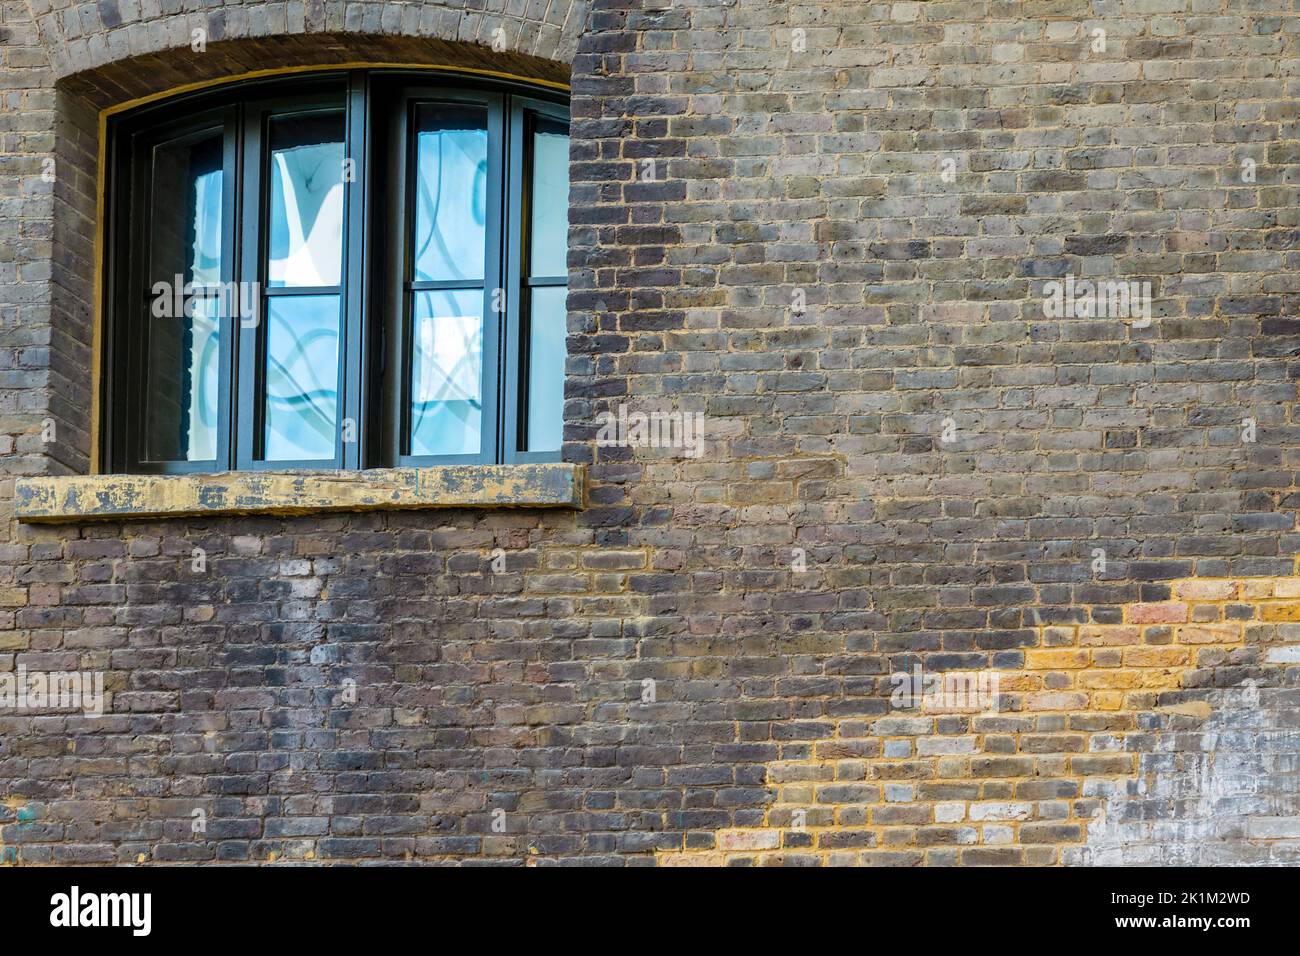 Window with reflection in an old brick wall Stock Photo